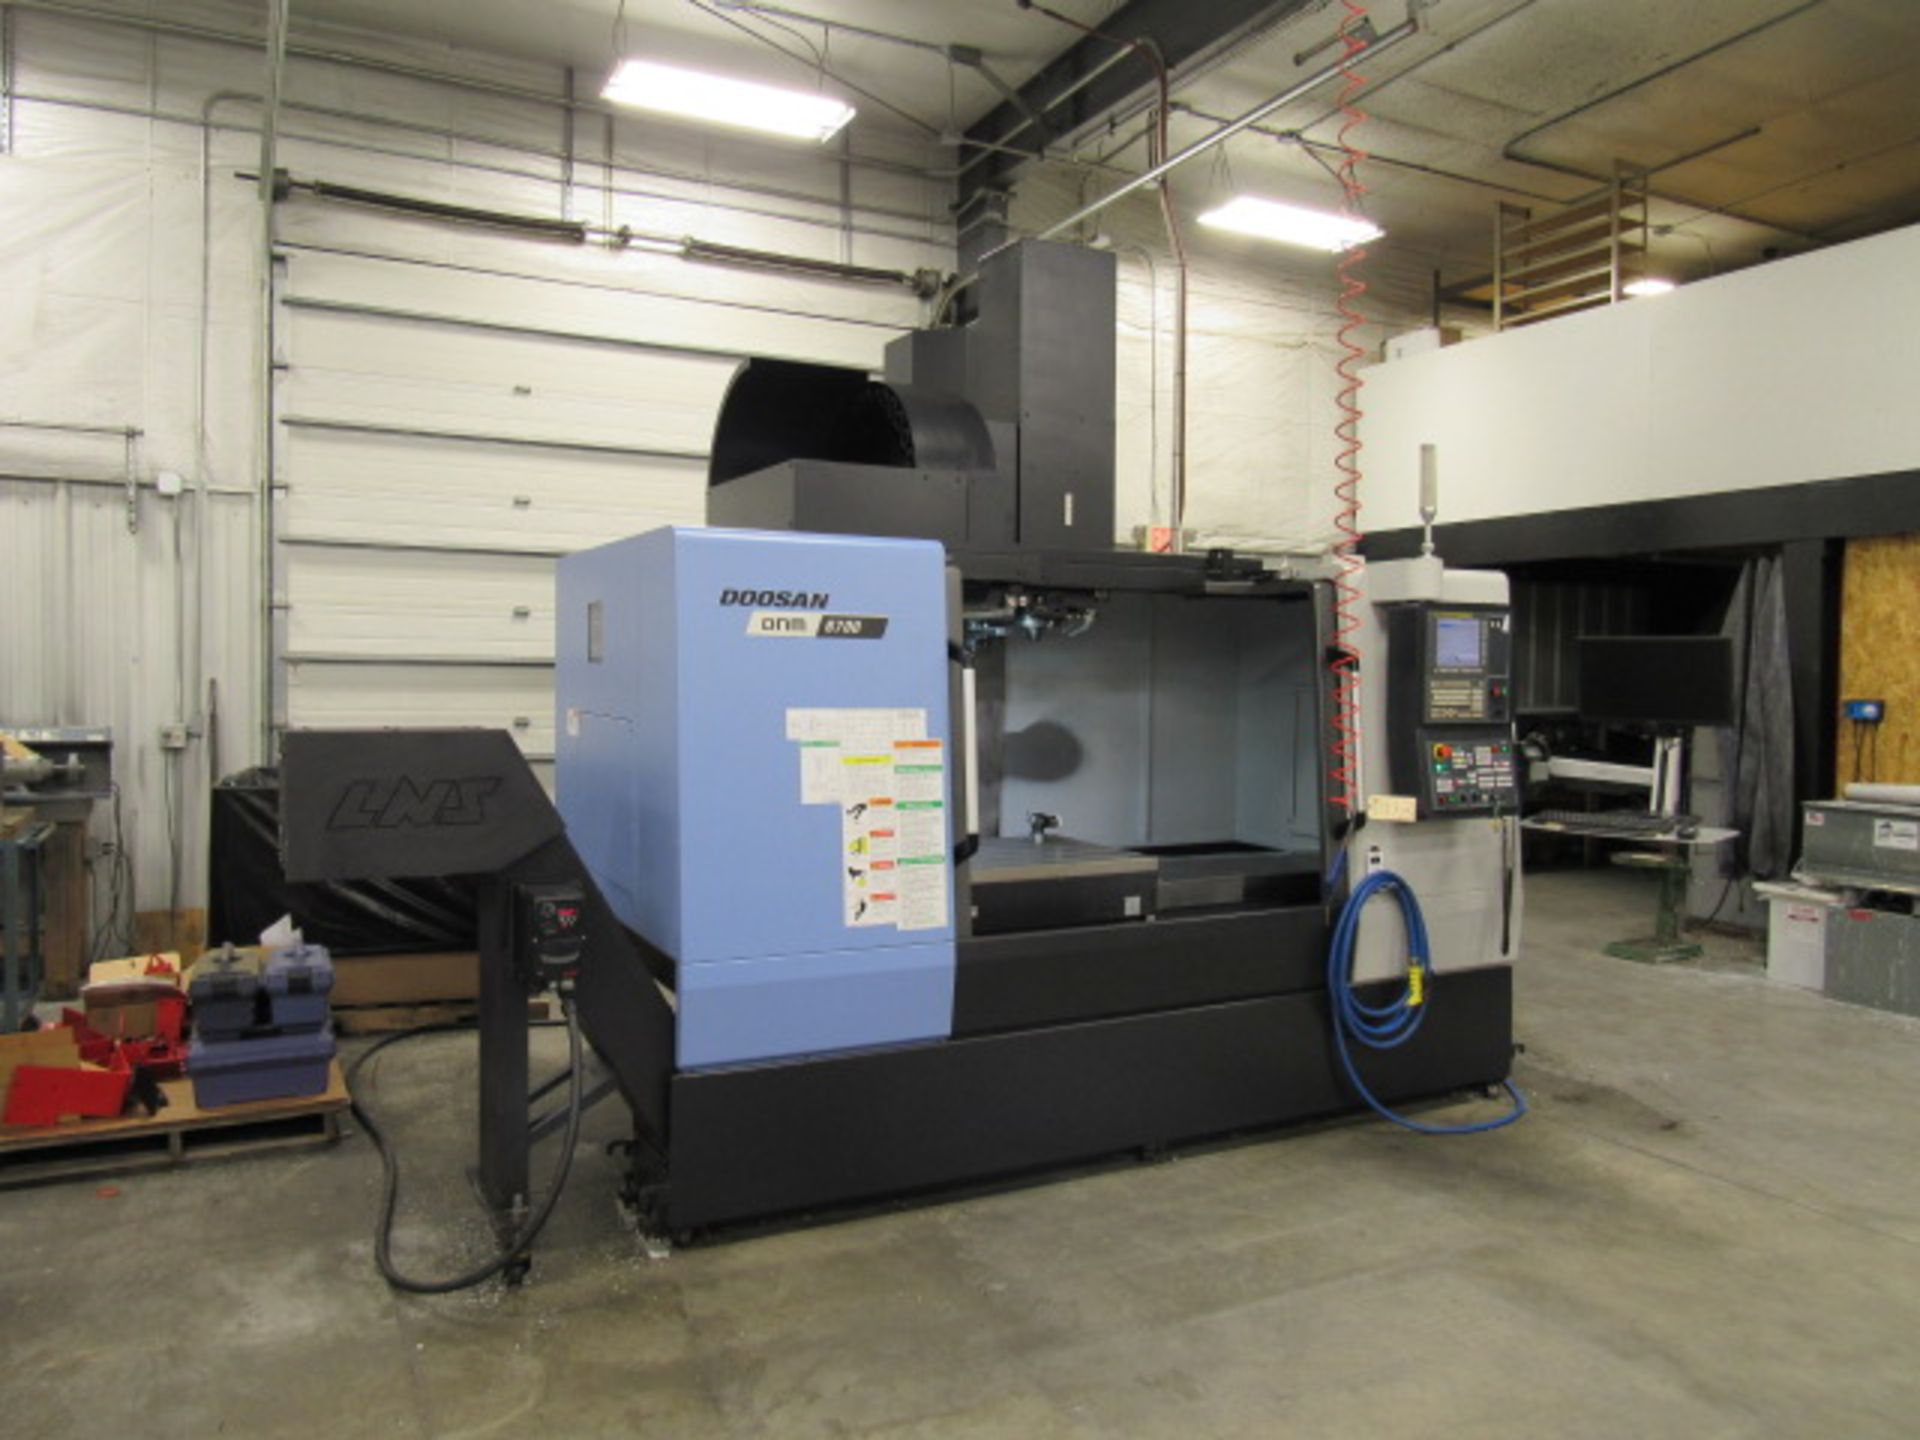 Doosan DNM 6700 CNC Vertical Machining Center with 59.1'' x 26.4'' Table, Big Plus #40, Spindle - Image 5 of 9